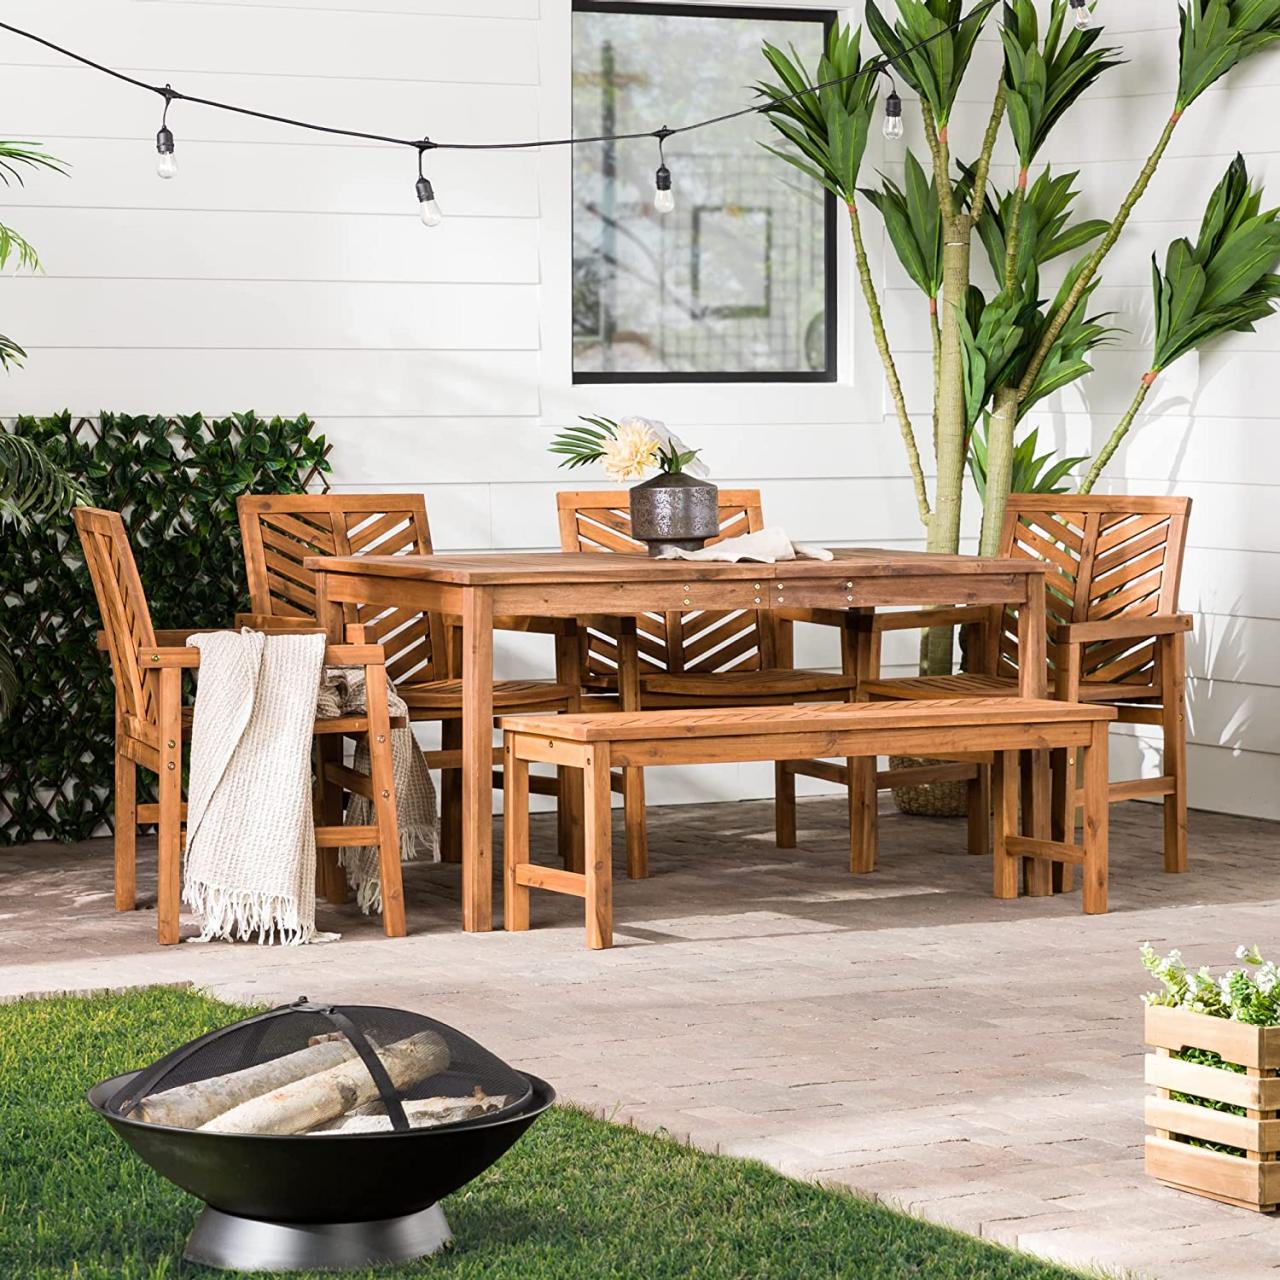 How To Build Patio Dining Tables